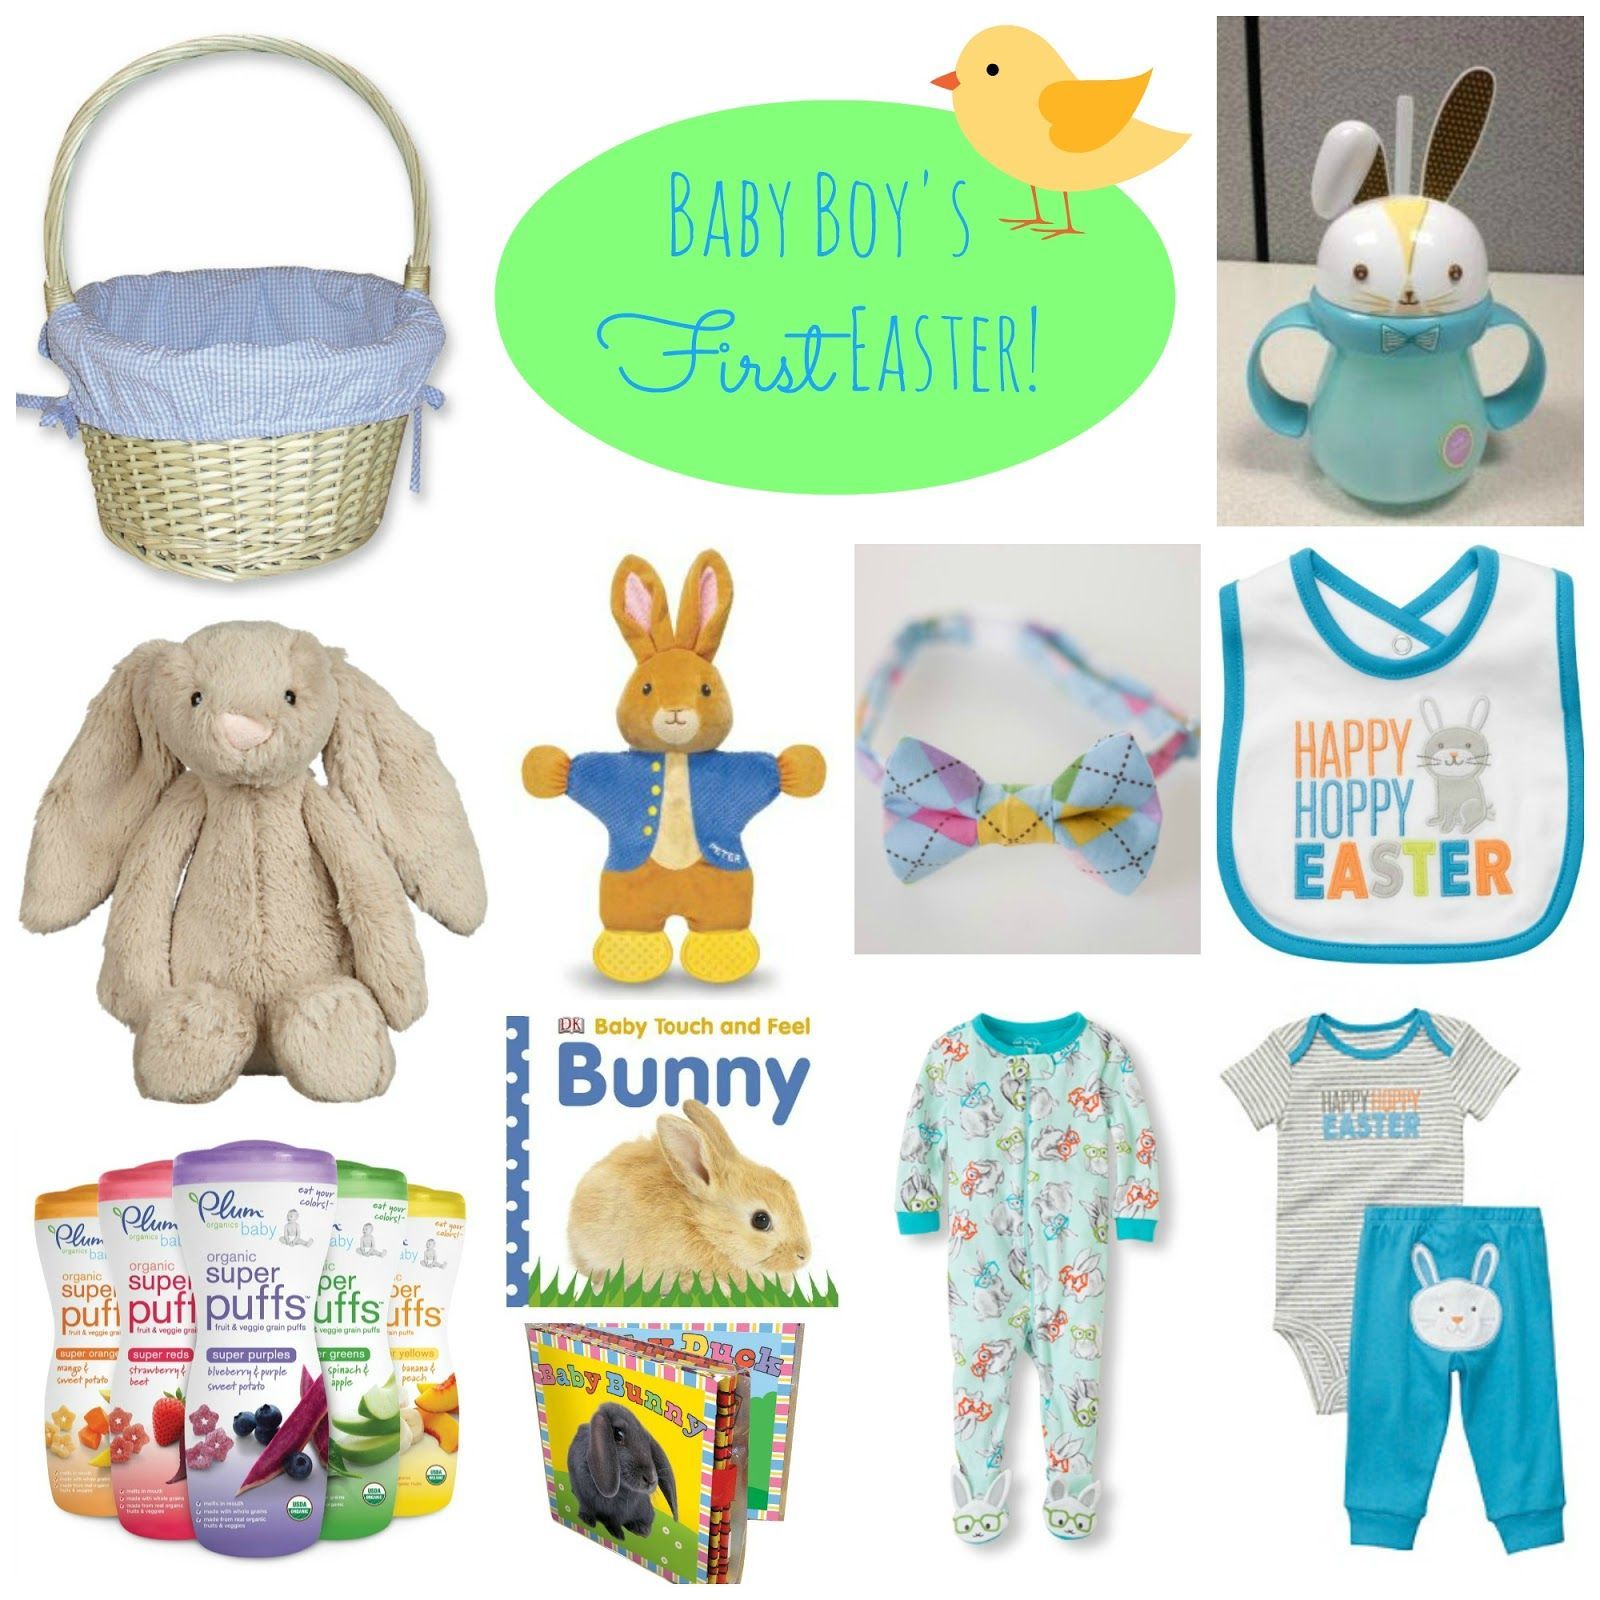 Baby Boy’s First Easter Basket Ideas (with links for purchasing!)